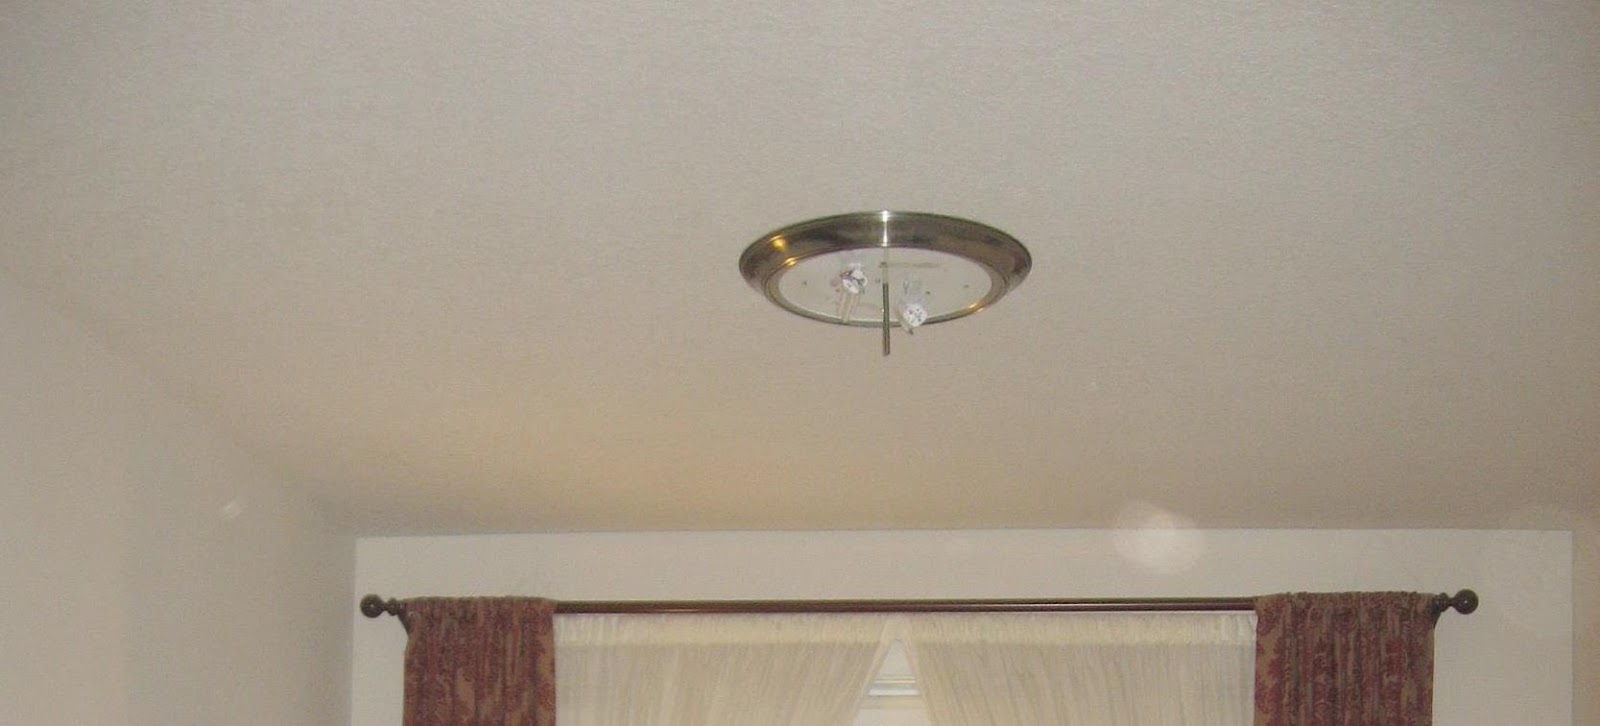 Energy Conservation How To Trial Placement Of Led Disk Downlighting